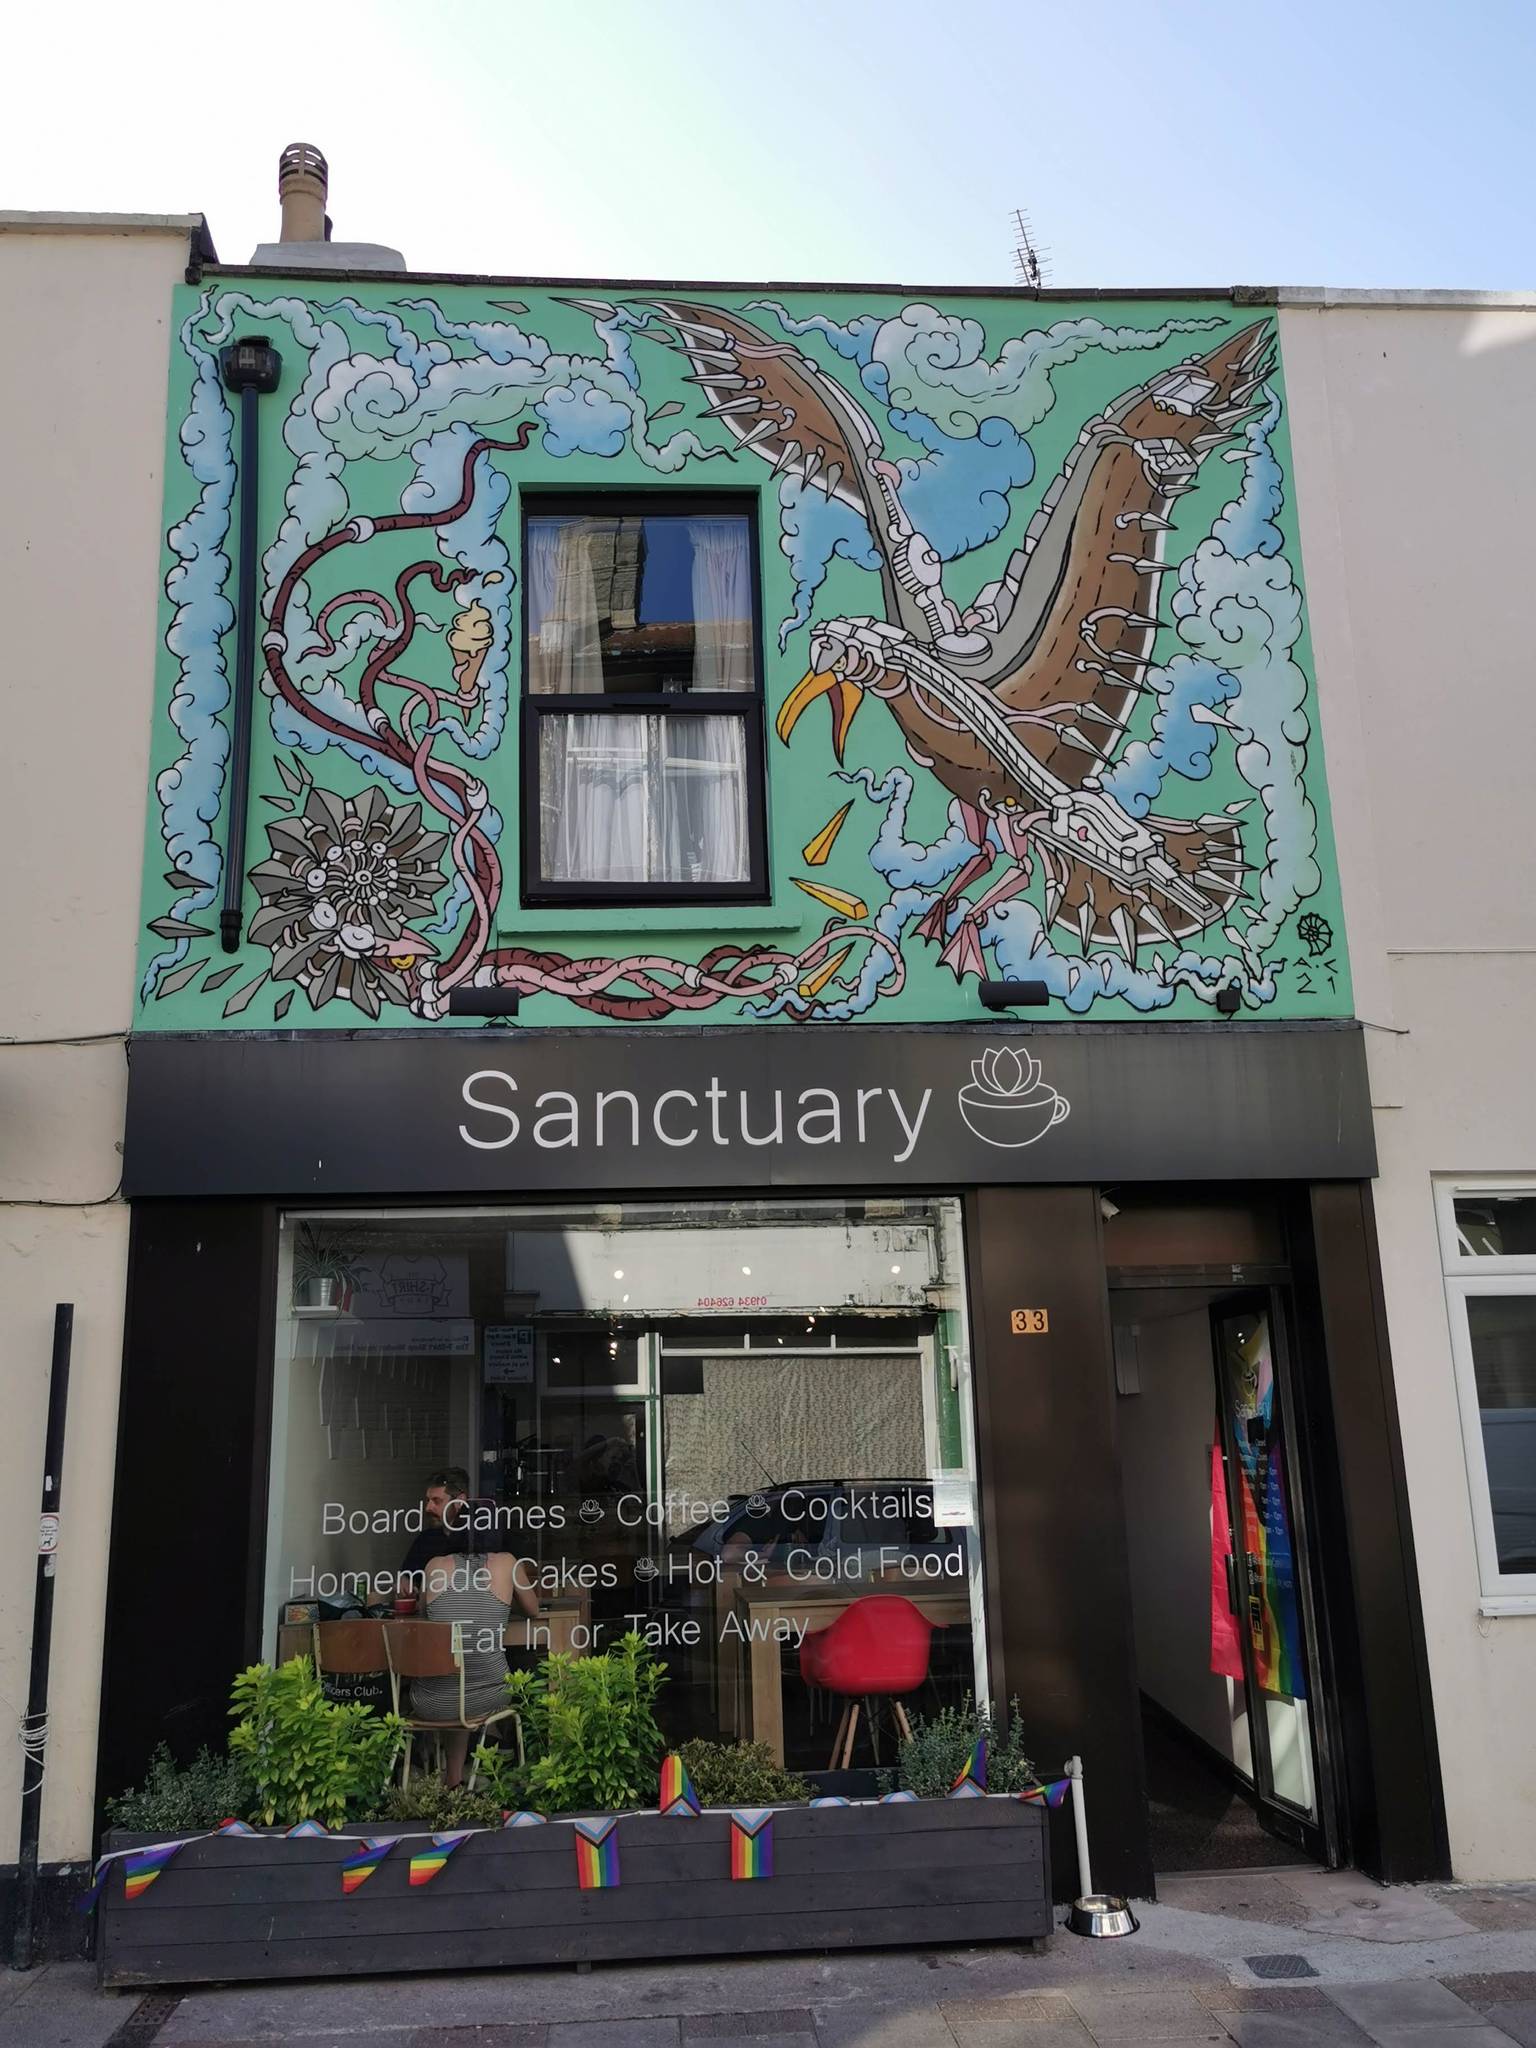 Andy Council&mdash;Seagull at the Sanctuary Cafe